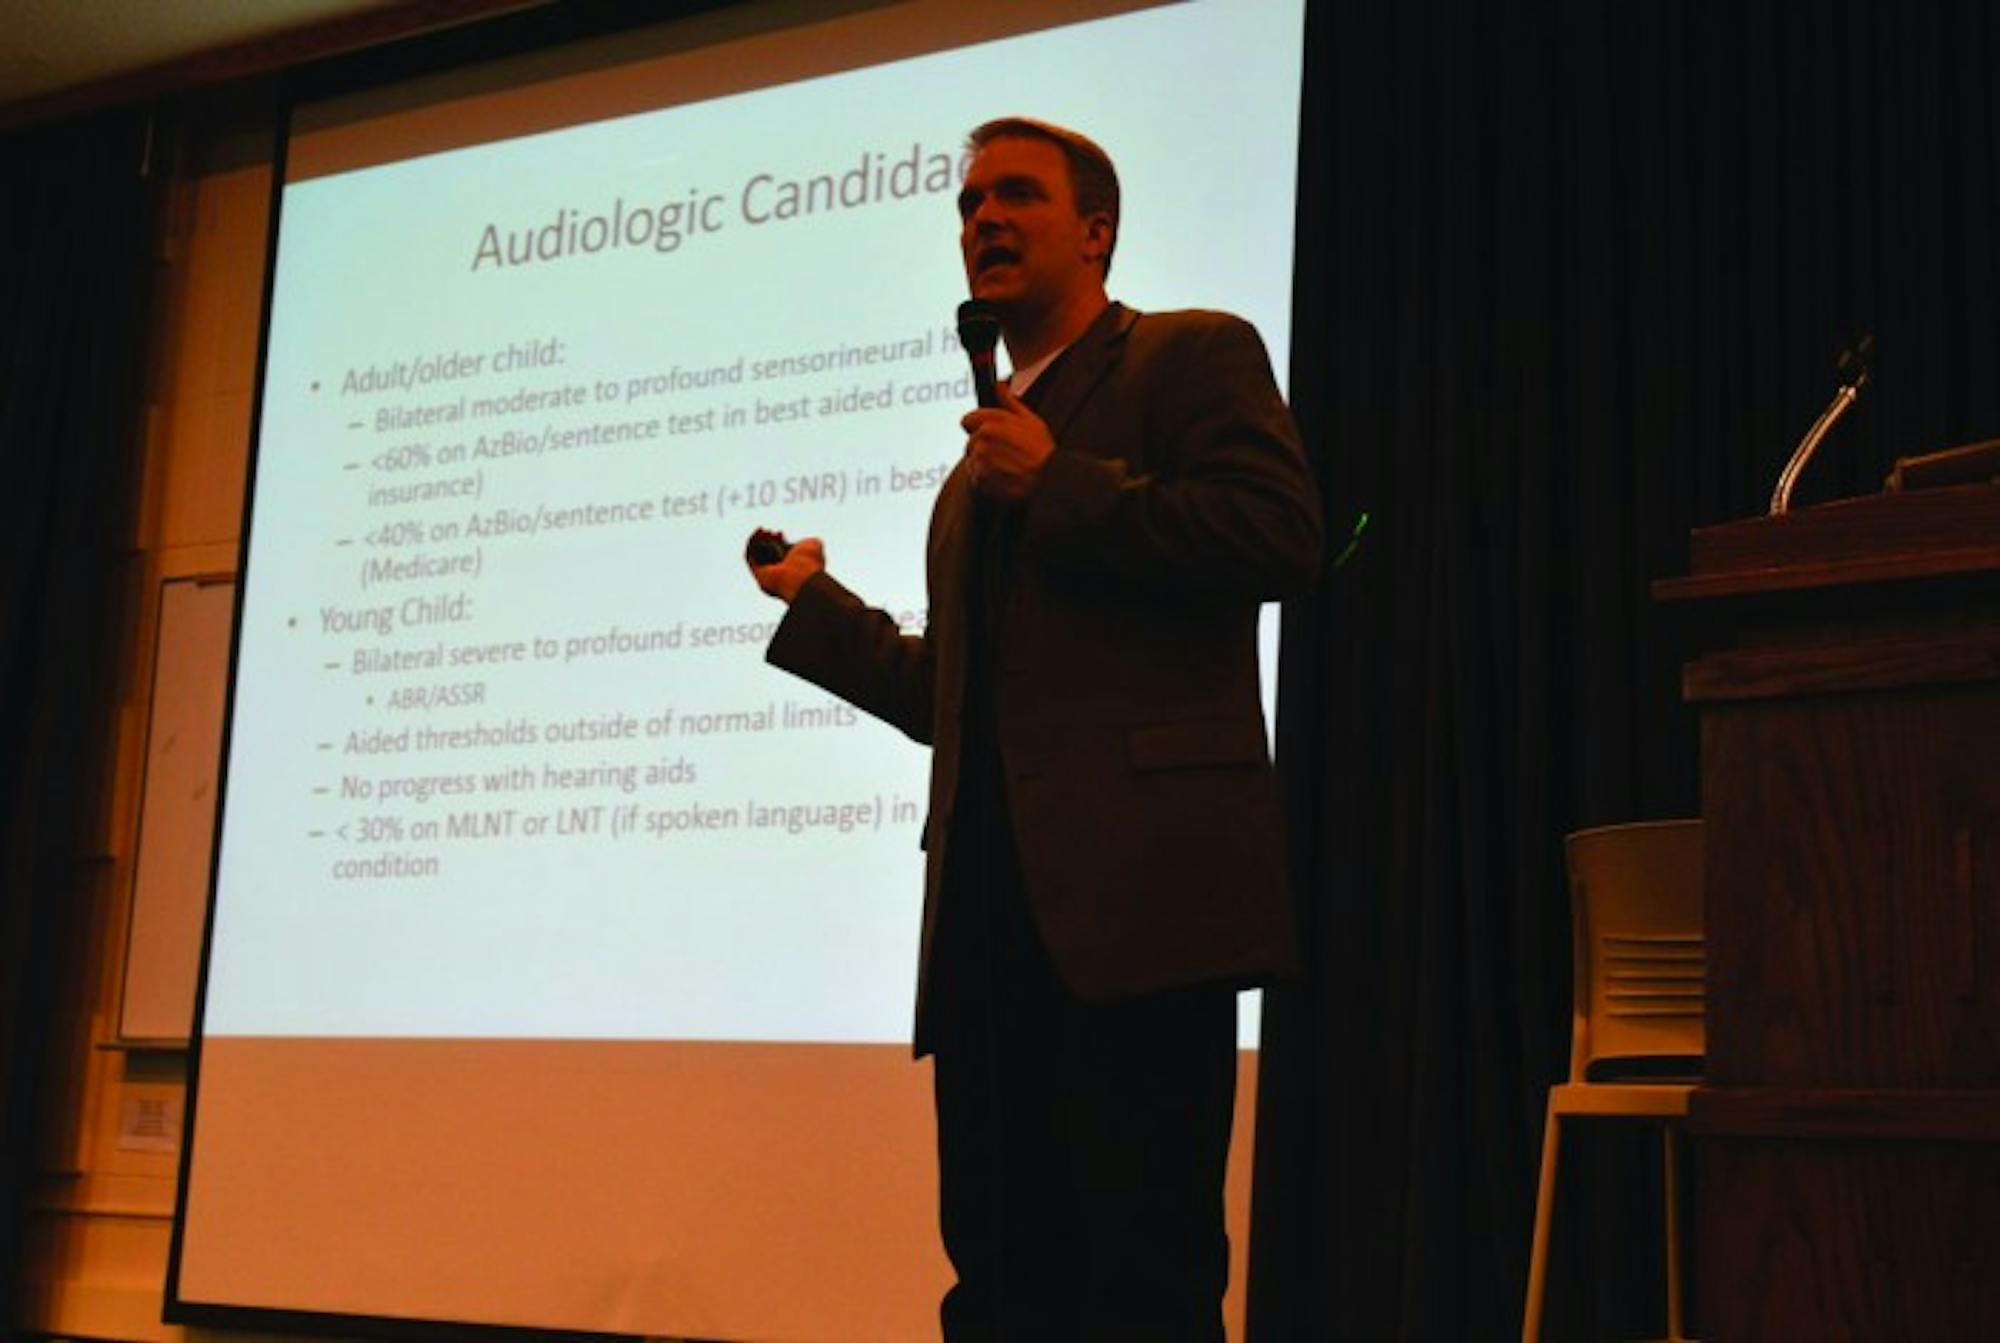 Jason P. Wiegand, assistant professor at University of South Carolina speaks on the future of cochlear implants.